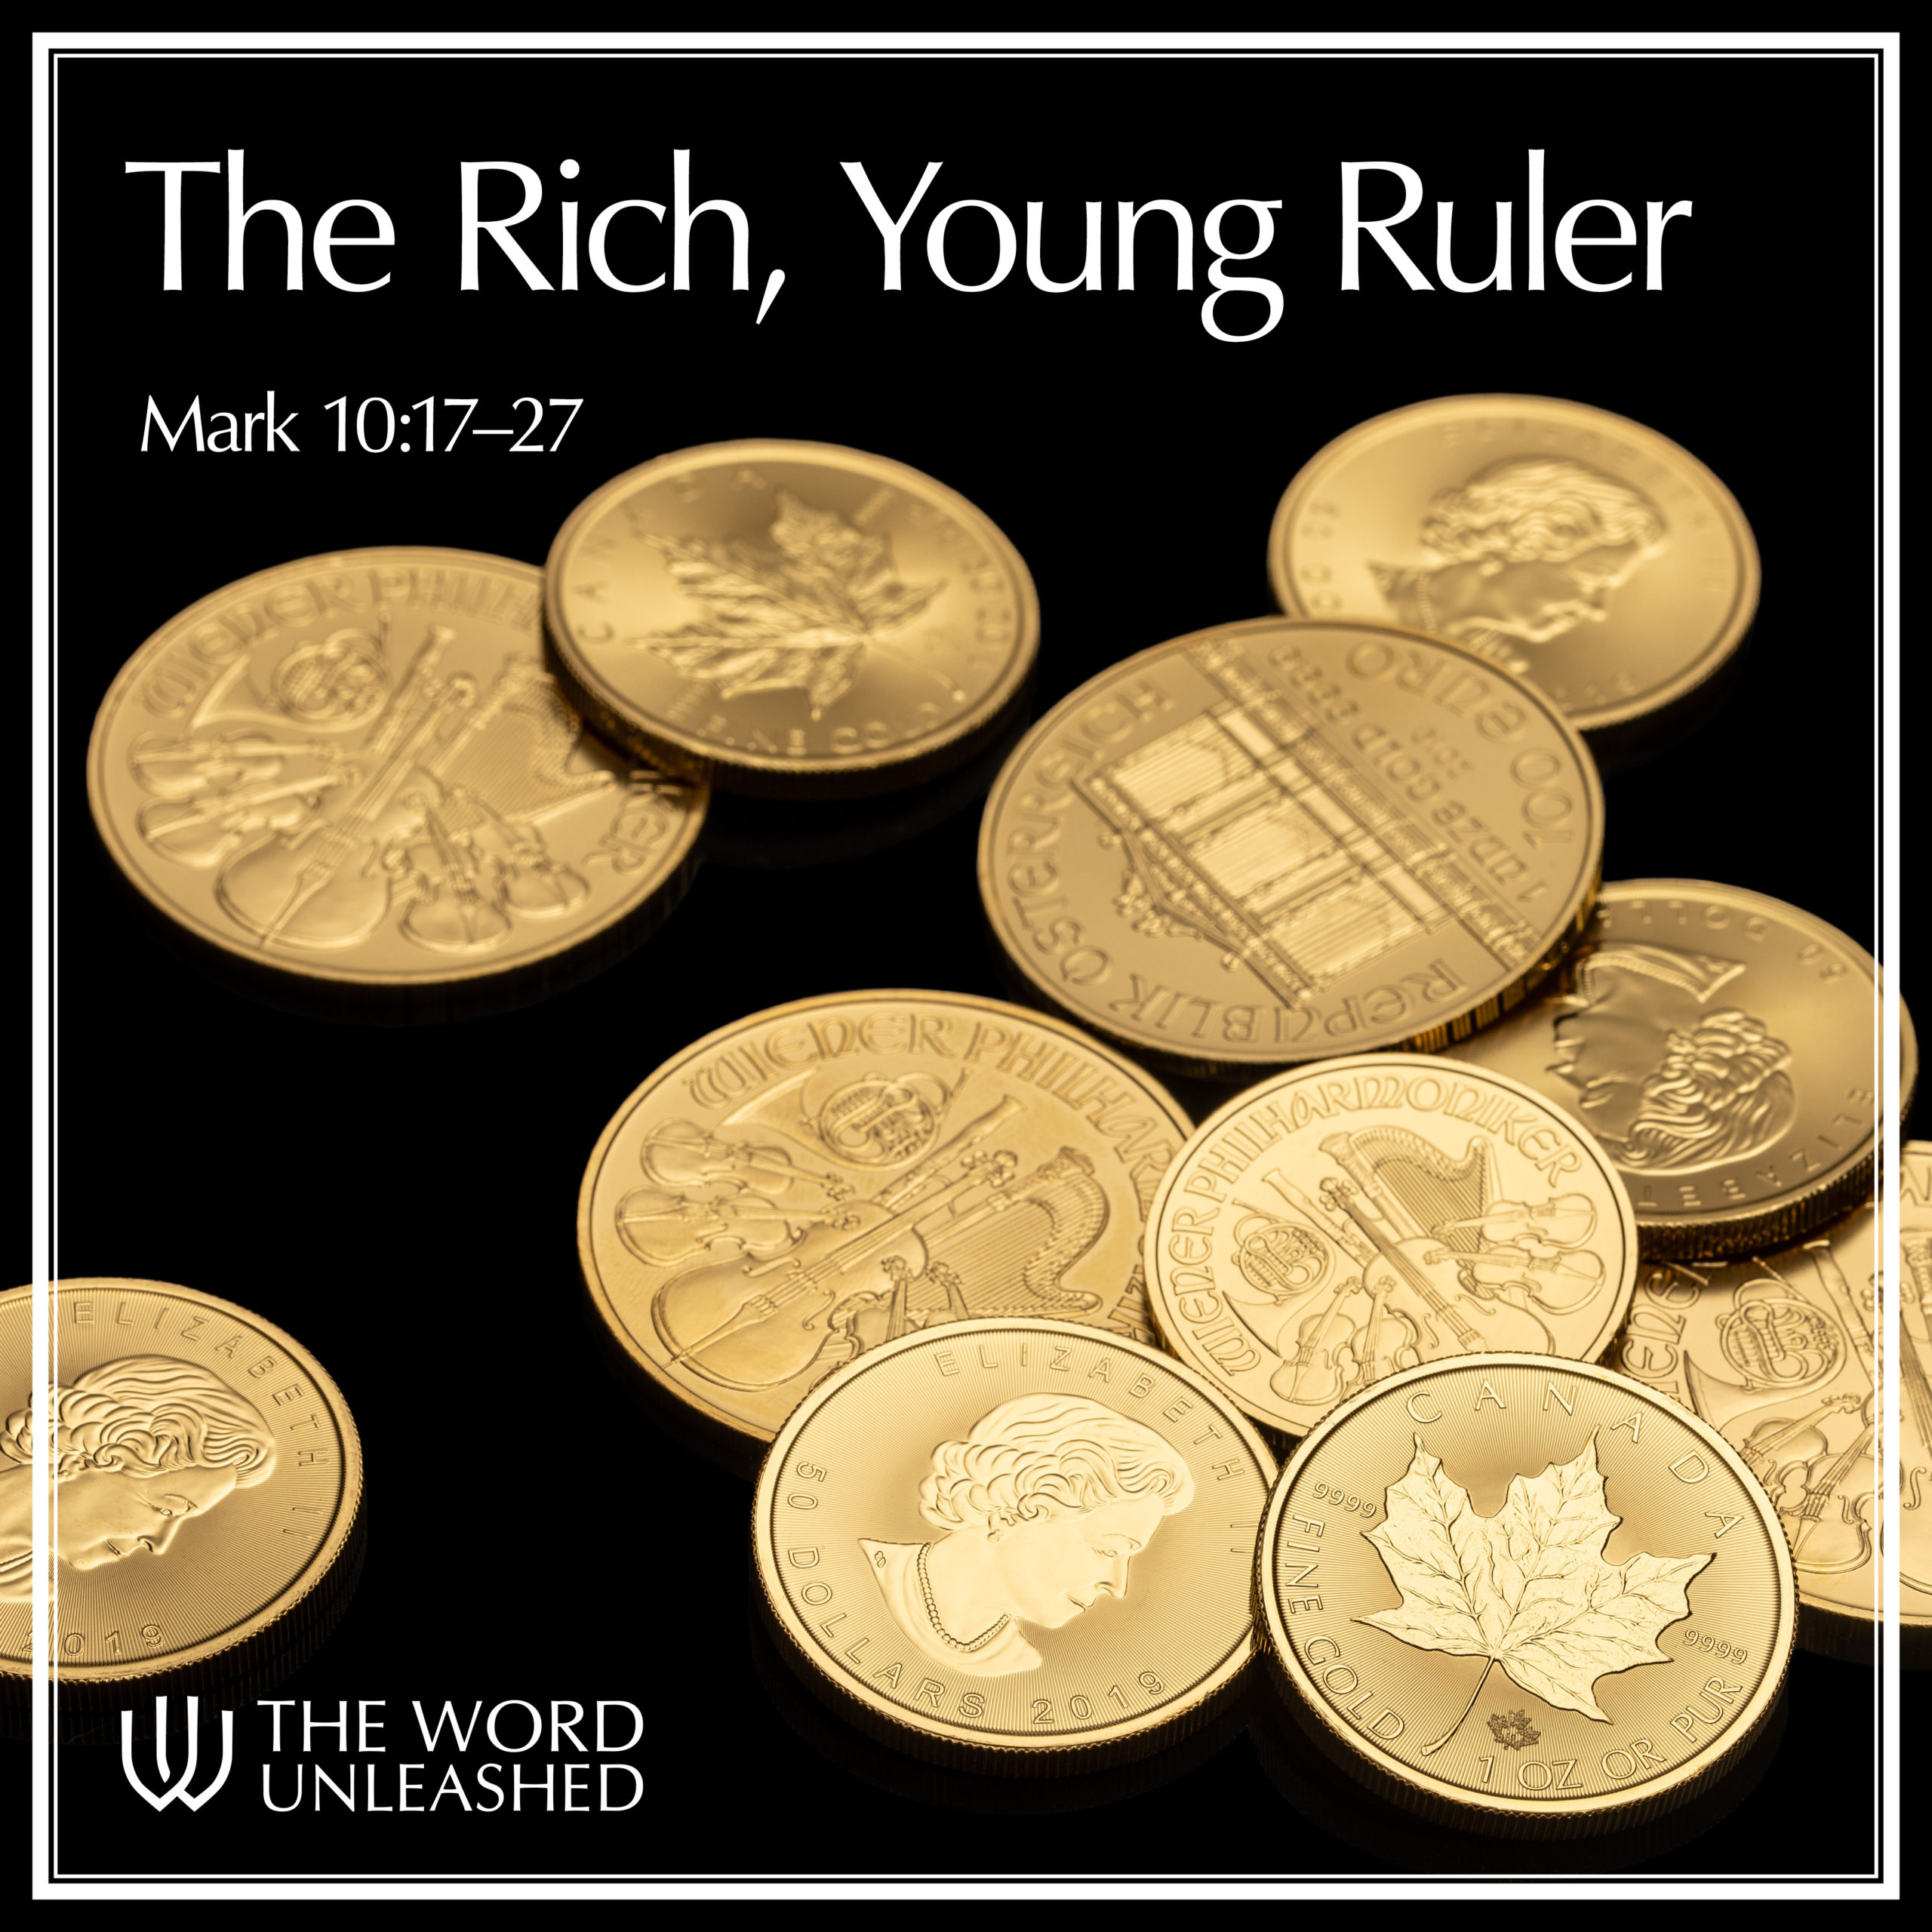 The Rich, Young Ruler